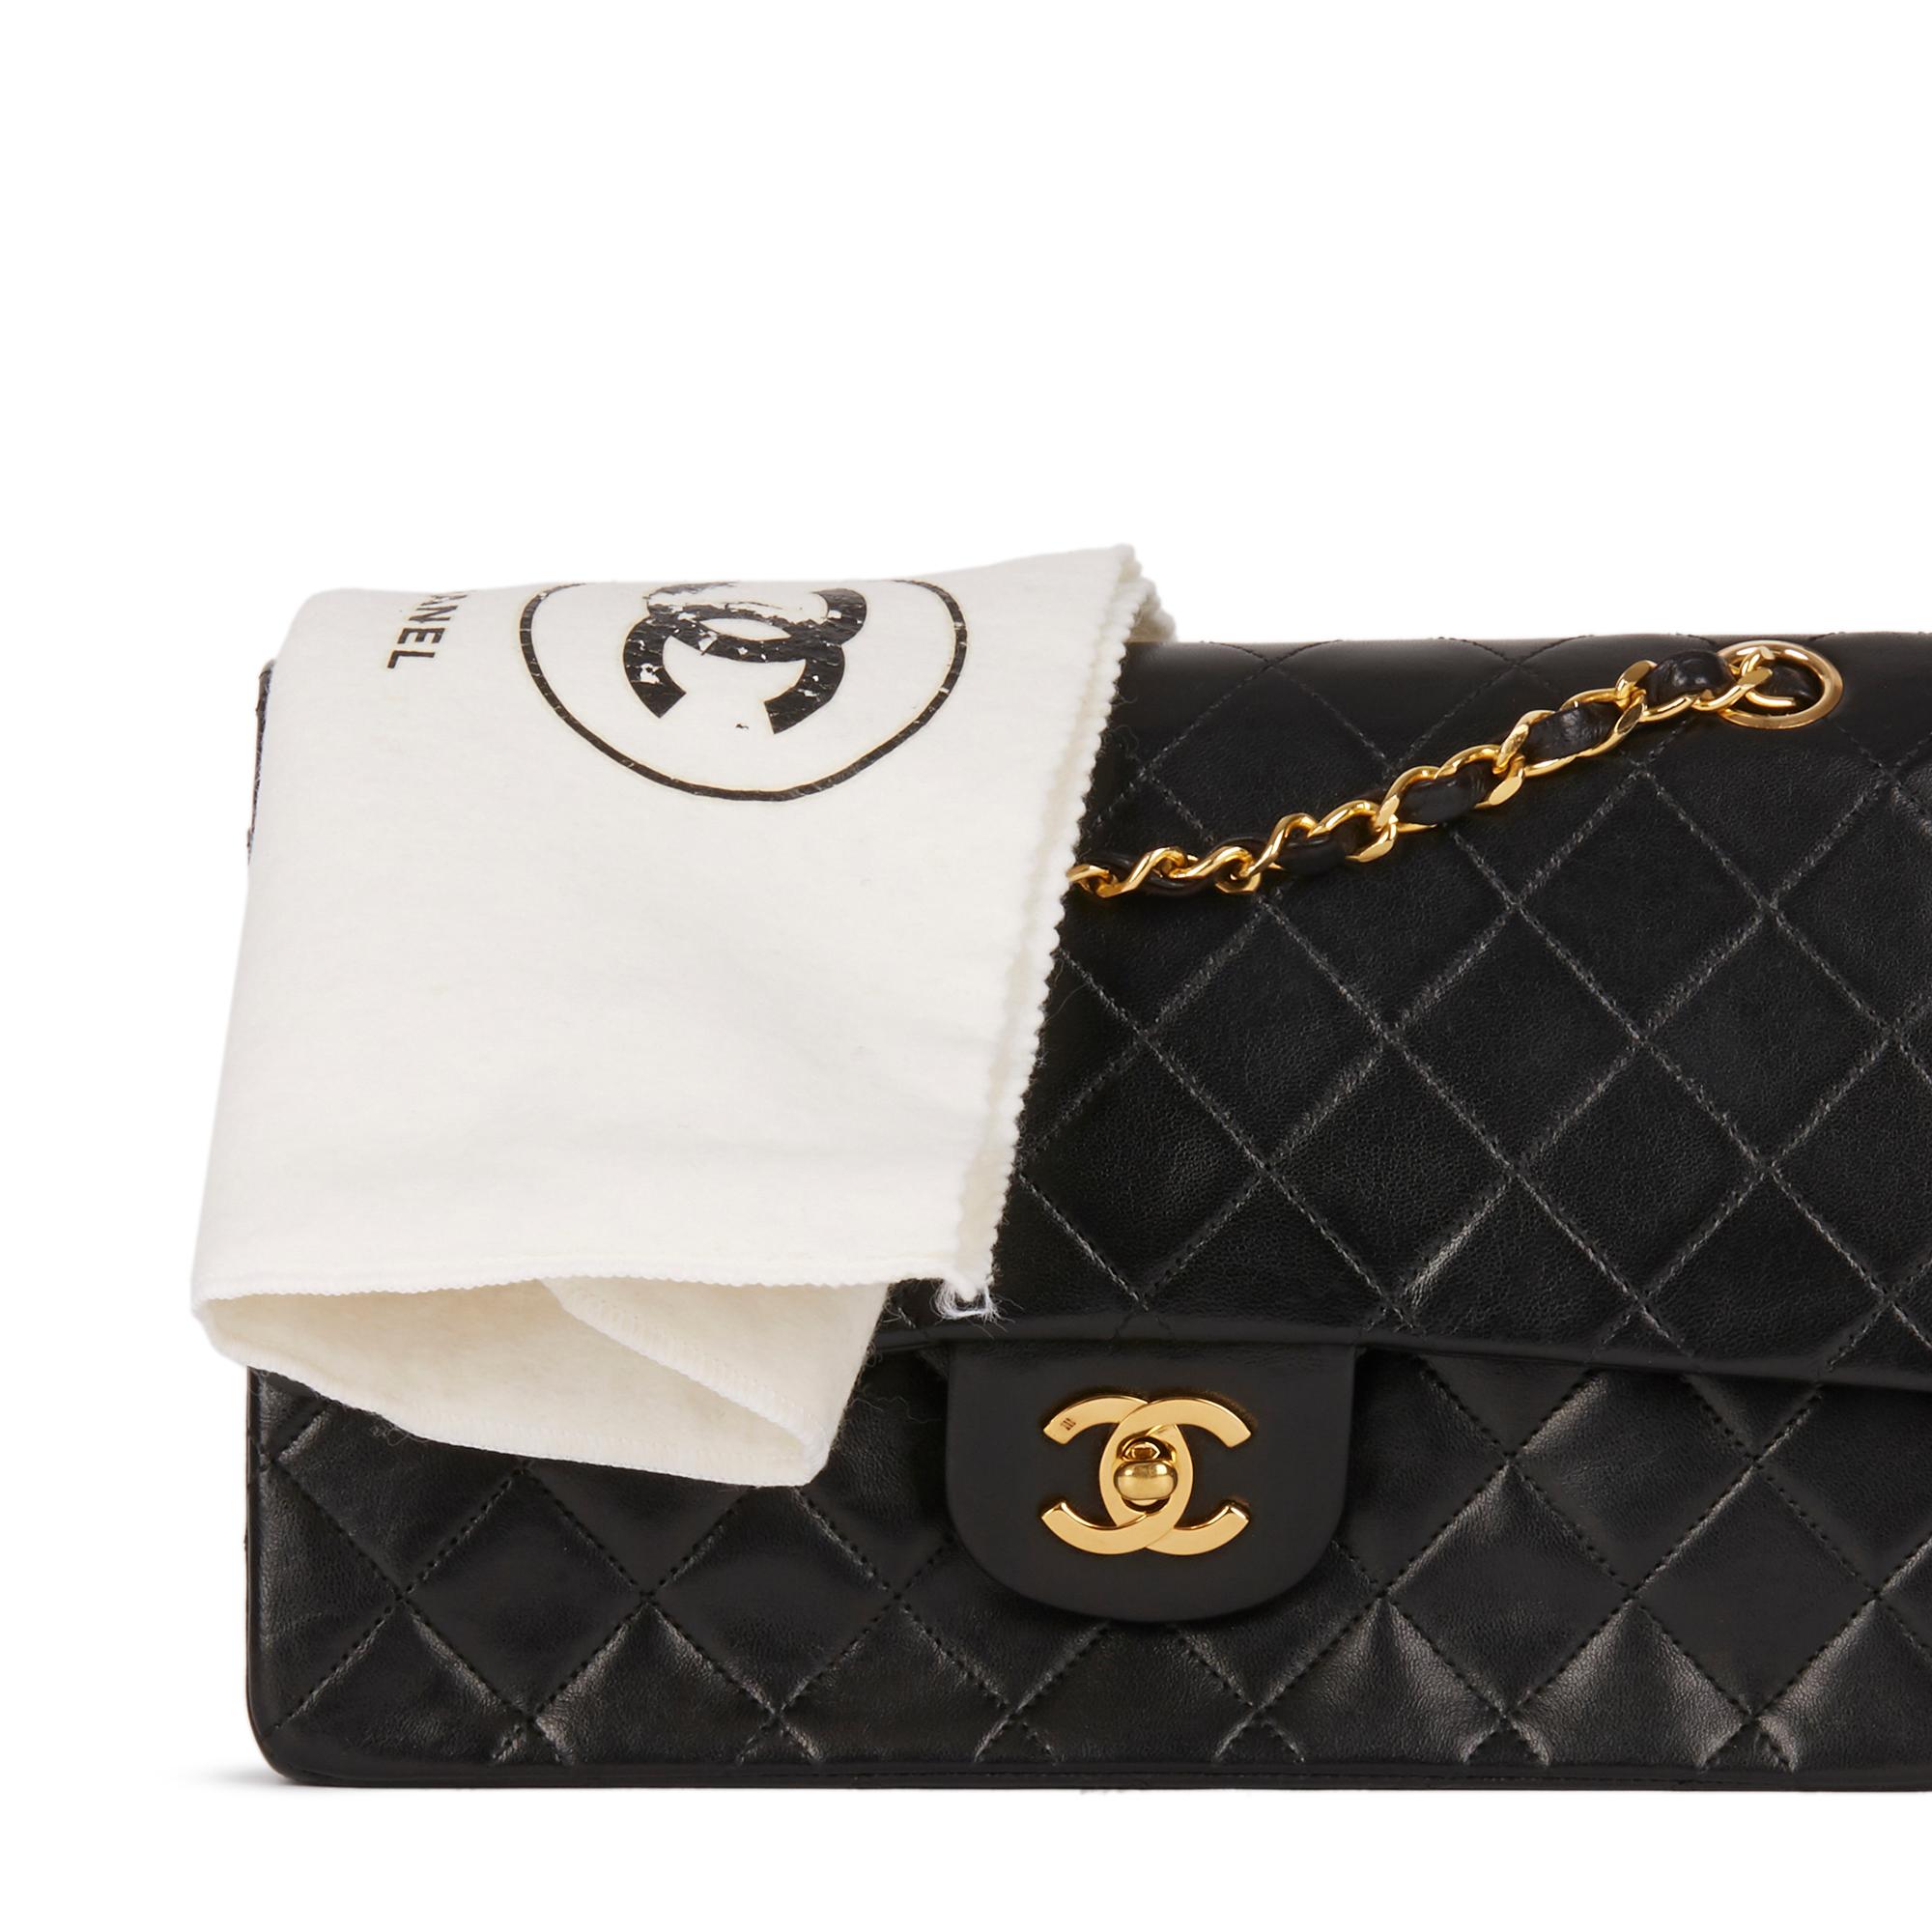 1988 Chanel Black Quilted Lambskin Vintage Medium Classic Double Flap Bag 6